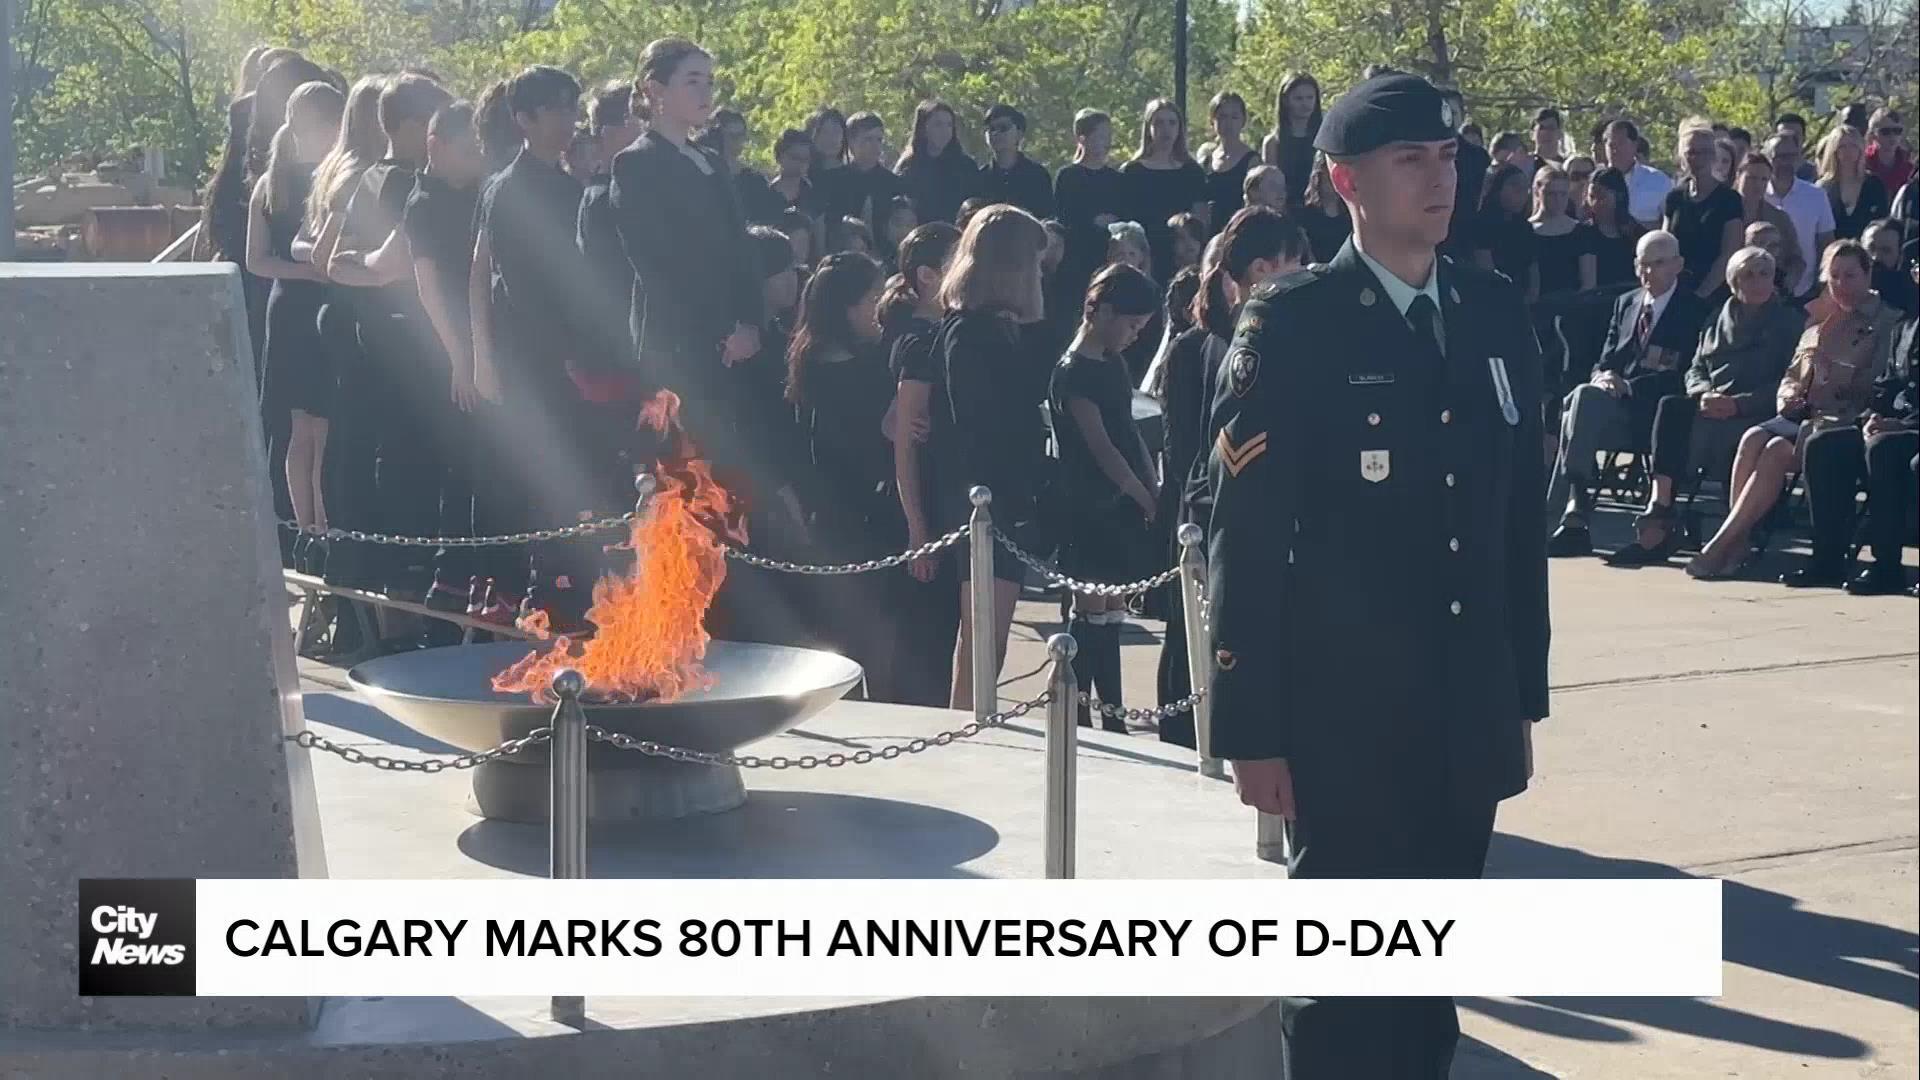 Calgary marks 80th anniversary of D-Day